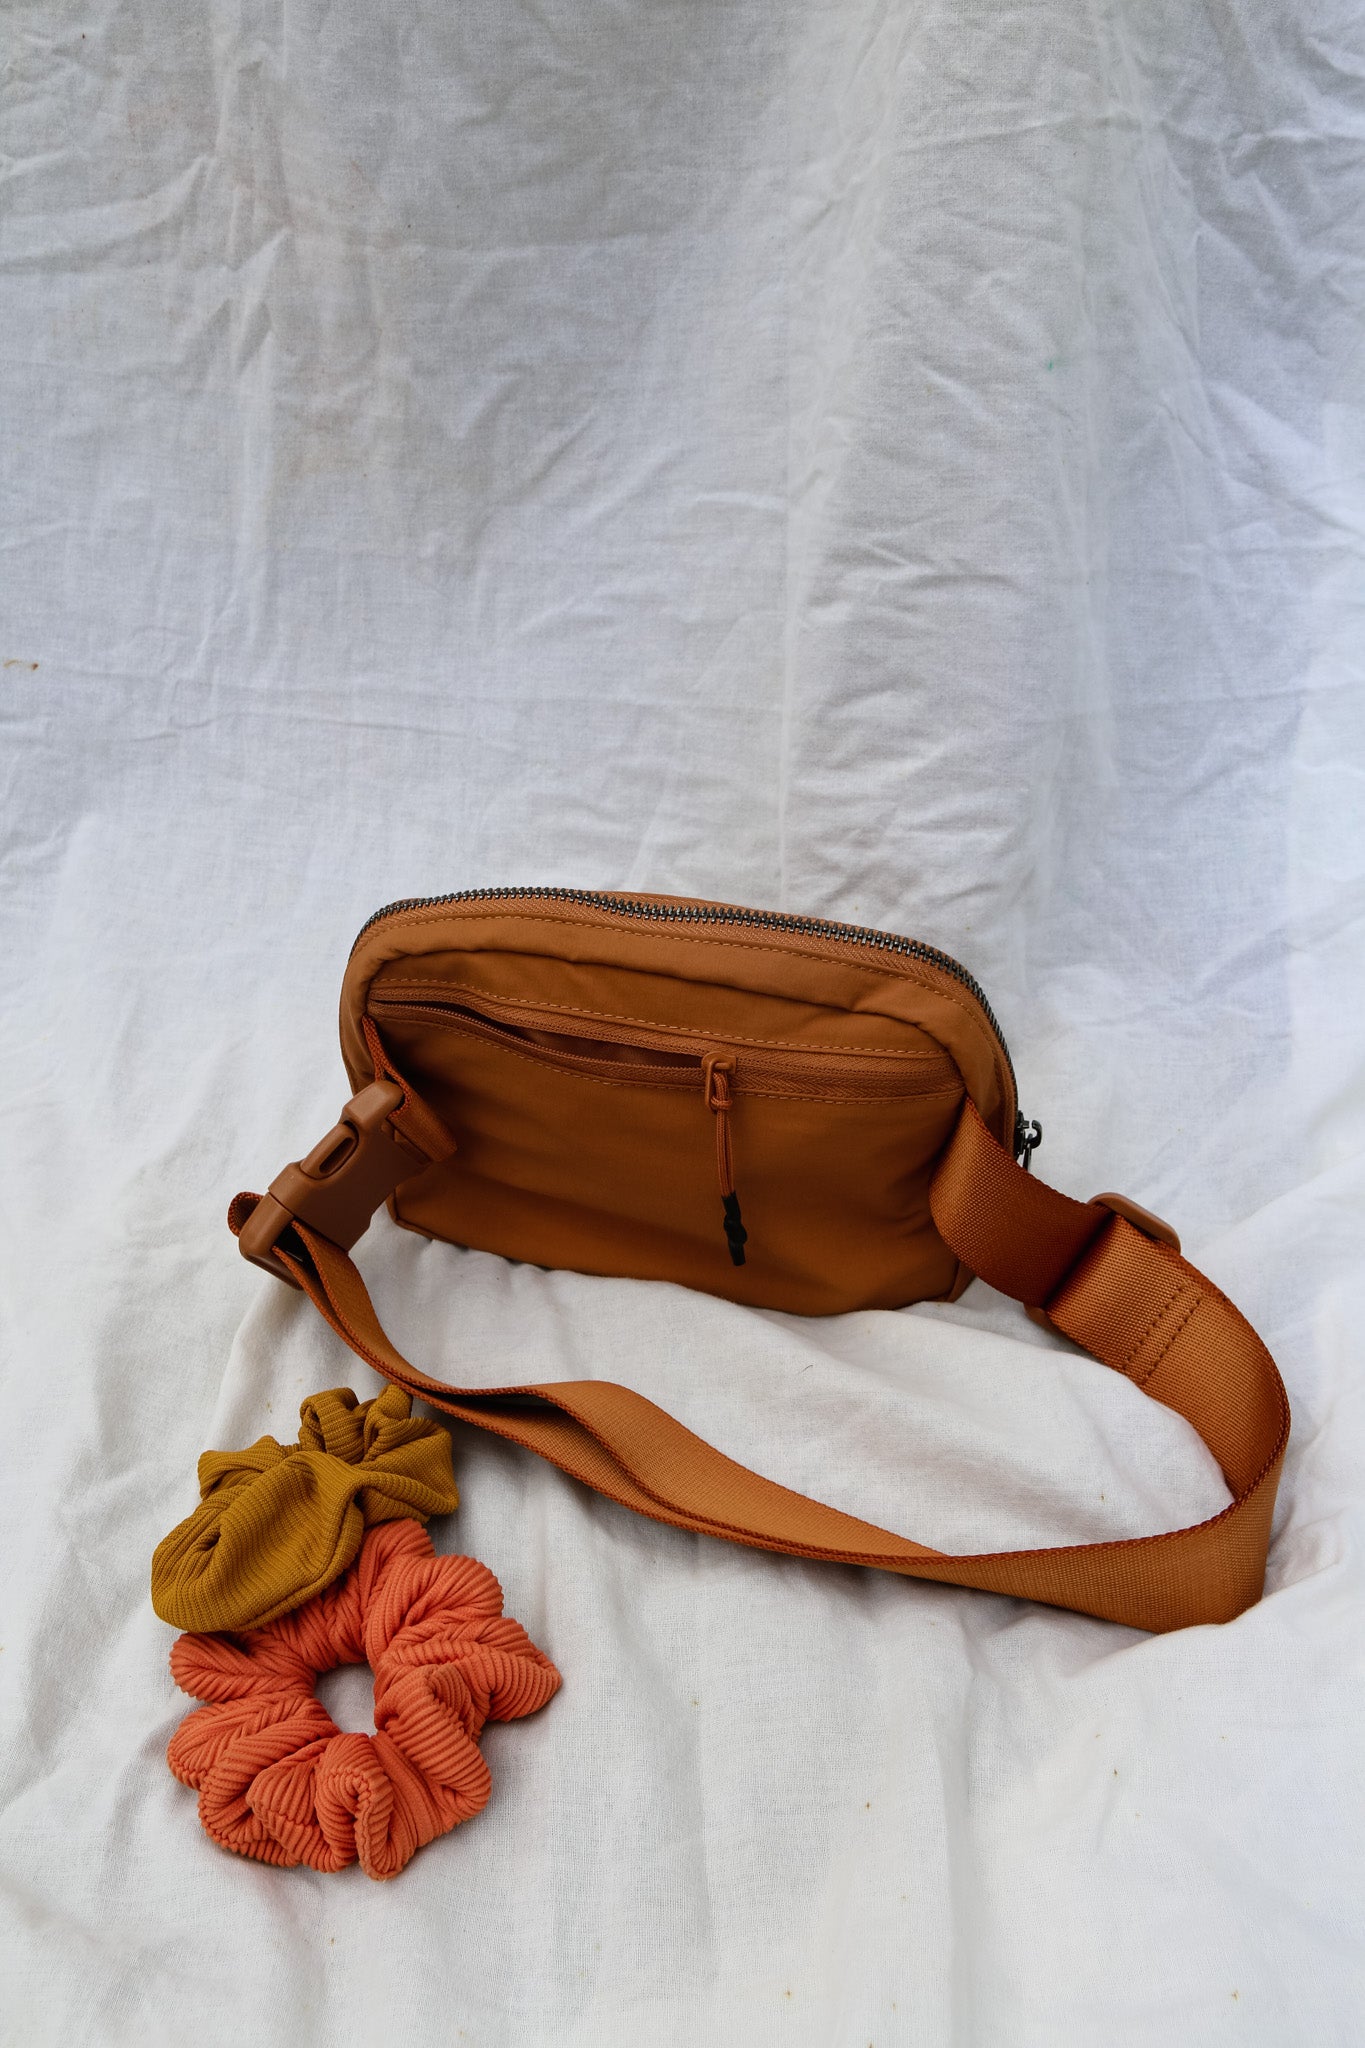 A cross body bag made from recycled materials, resembling a 1L size and inspired by Lululemon. The bag features vibrant colors reminiscent of bikinis, making it a stylish and sustainable accessory from hawaii kailua oahu sustainable swimwear accessories tai swim co holo holo bag in terracotta